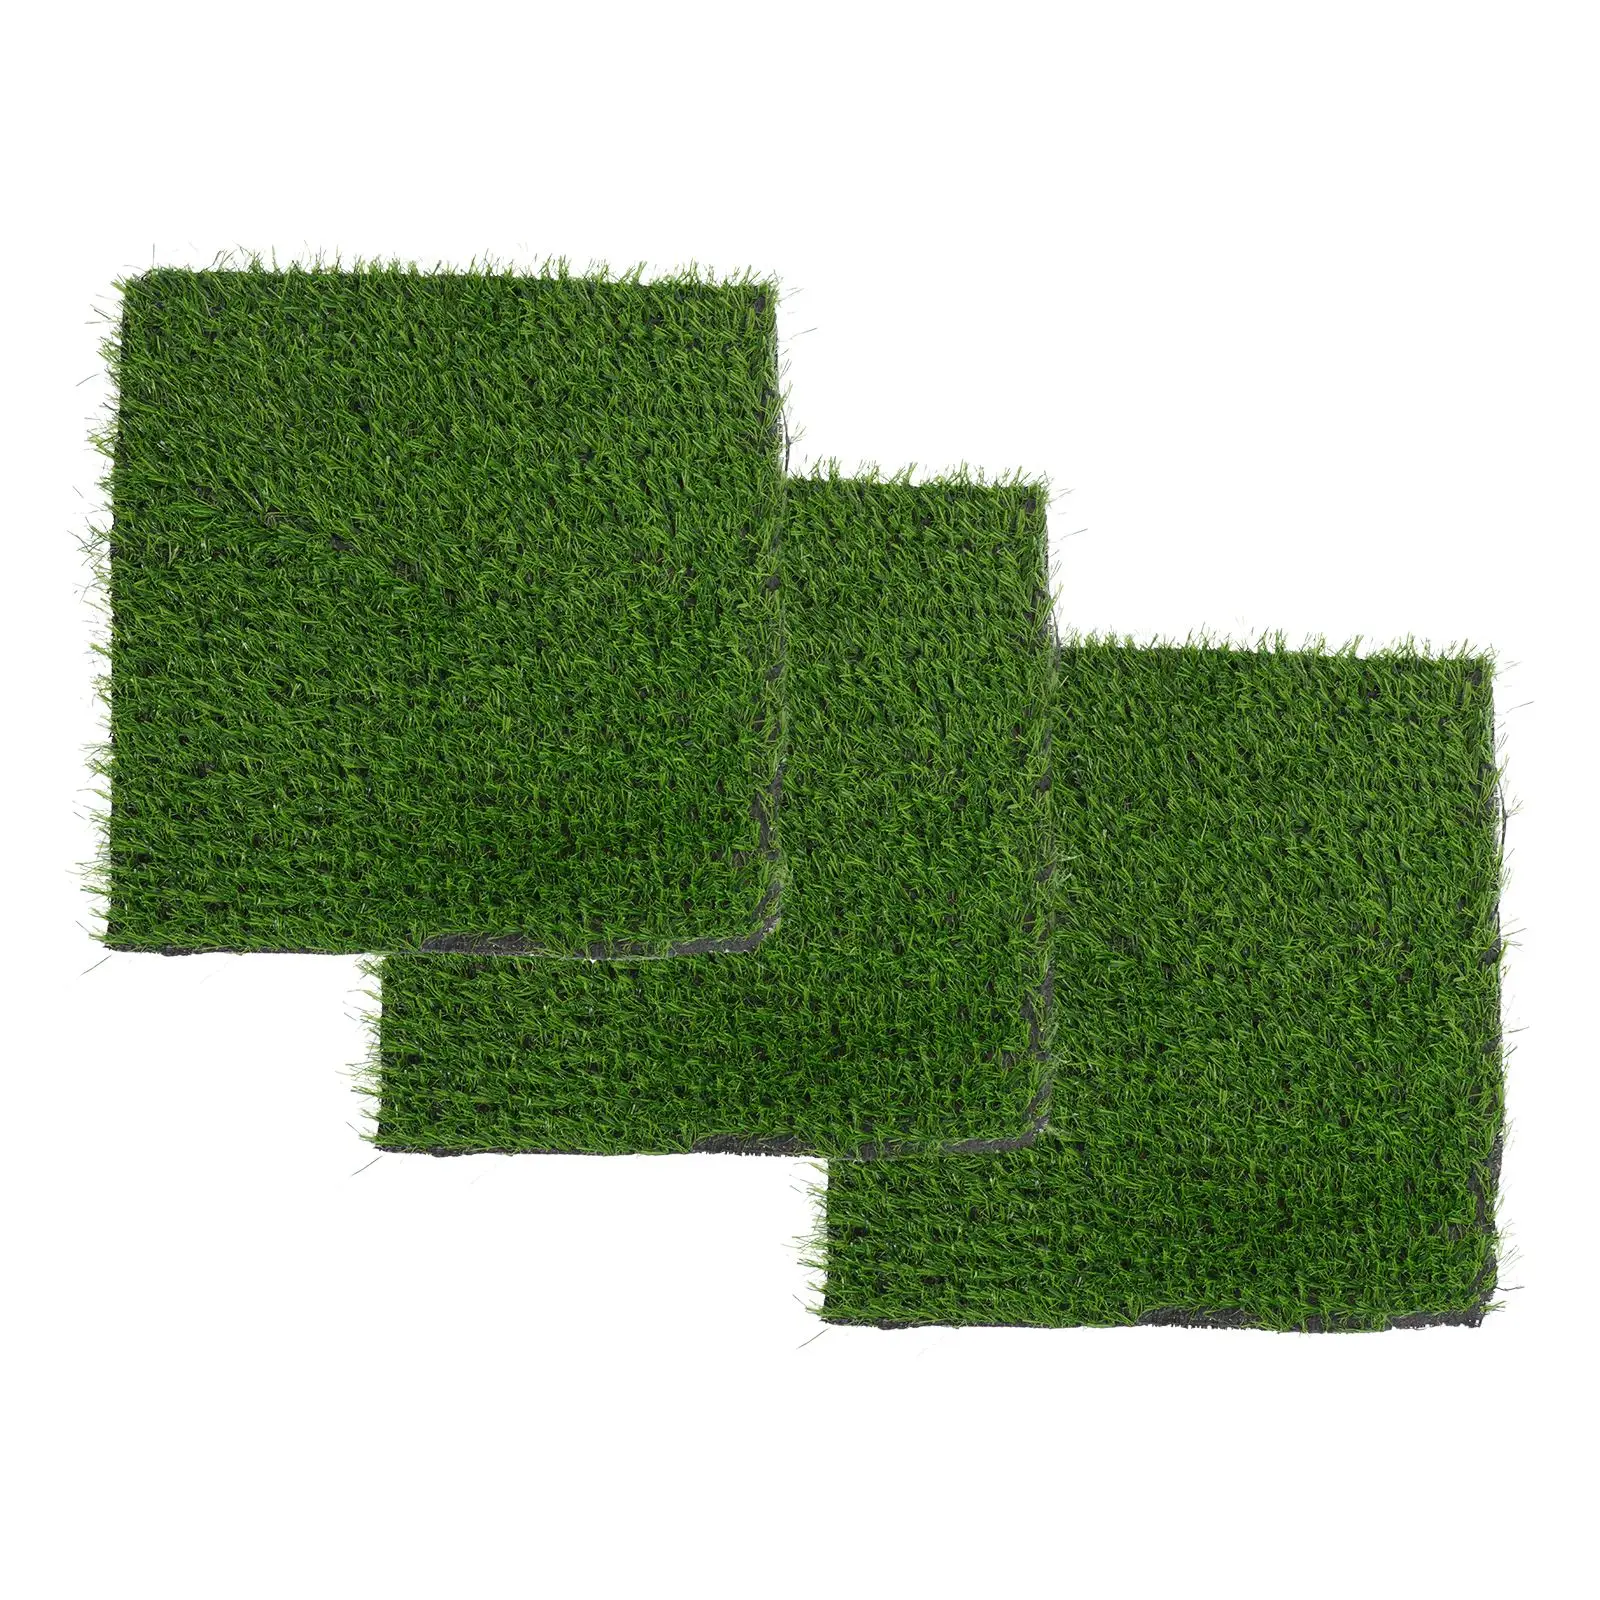 3pcs Chicken Cage Cushions Chicken Cage Mats Artificial Grass Mats Washable Nesting Pads Chicken Nesting Box Fake Grass Cushions